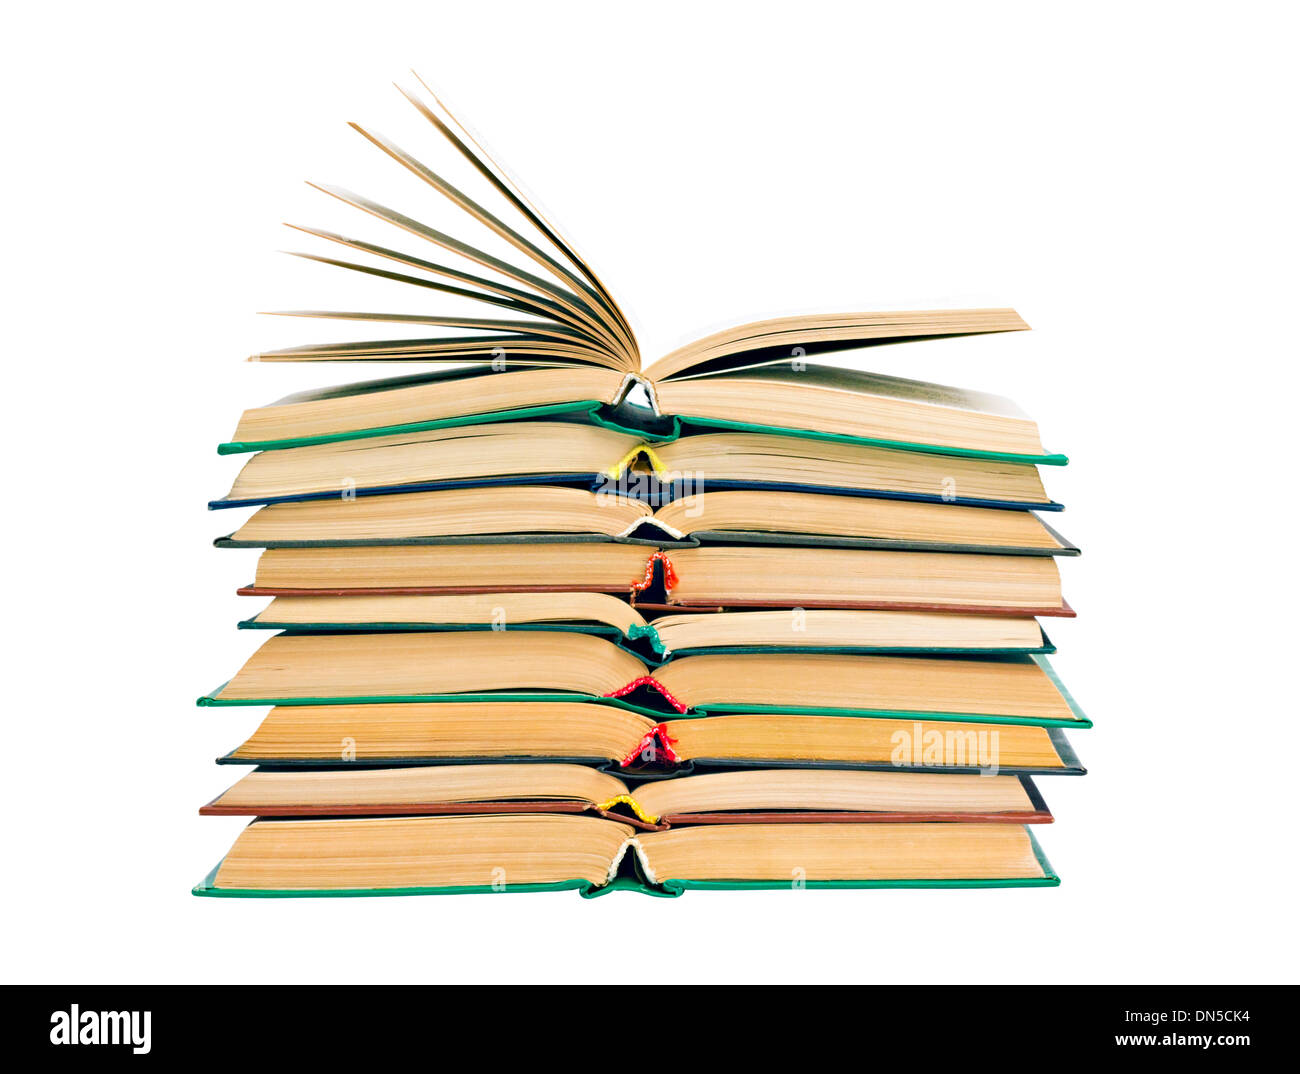 Books stacked open Cut Out Stock Images & Pictures - Alamy